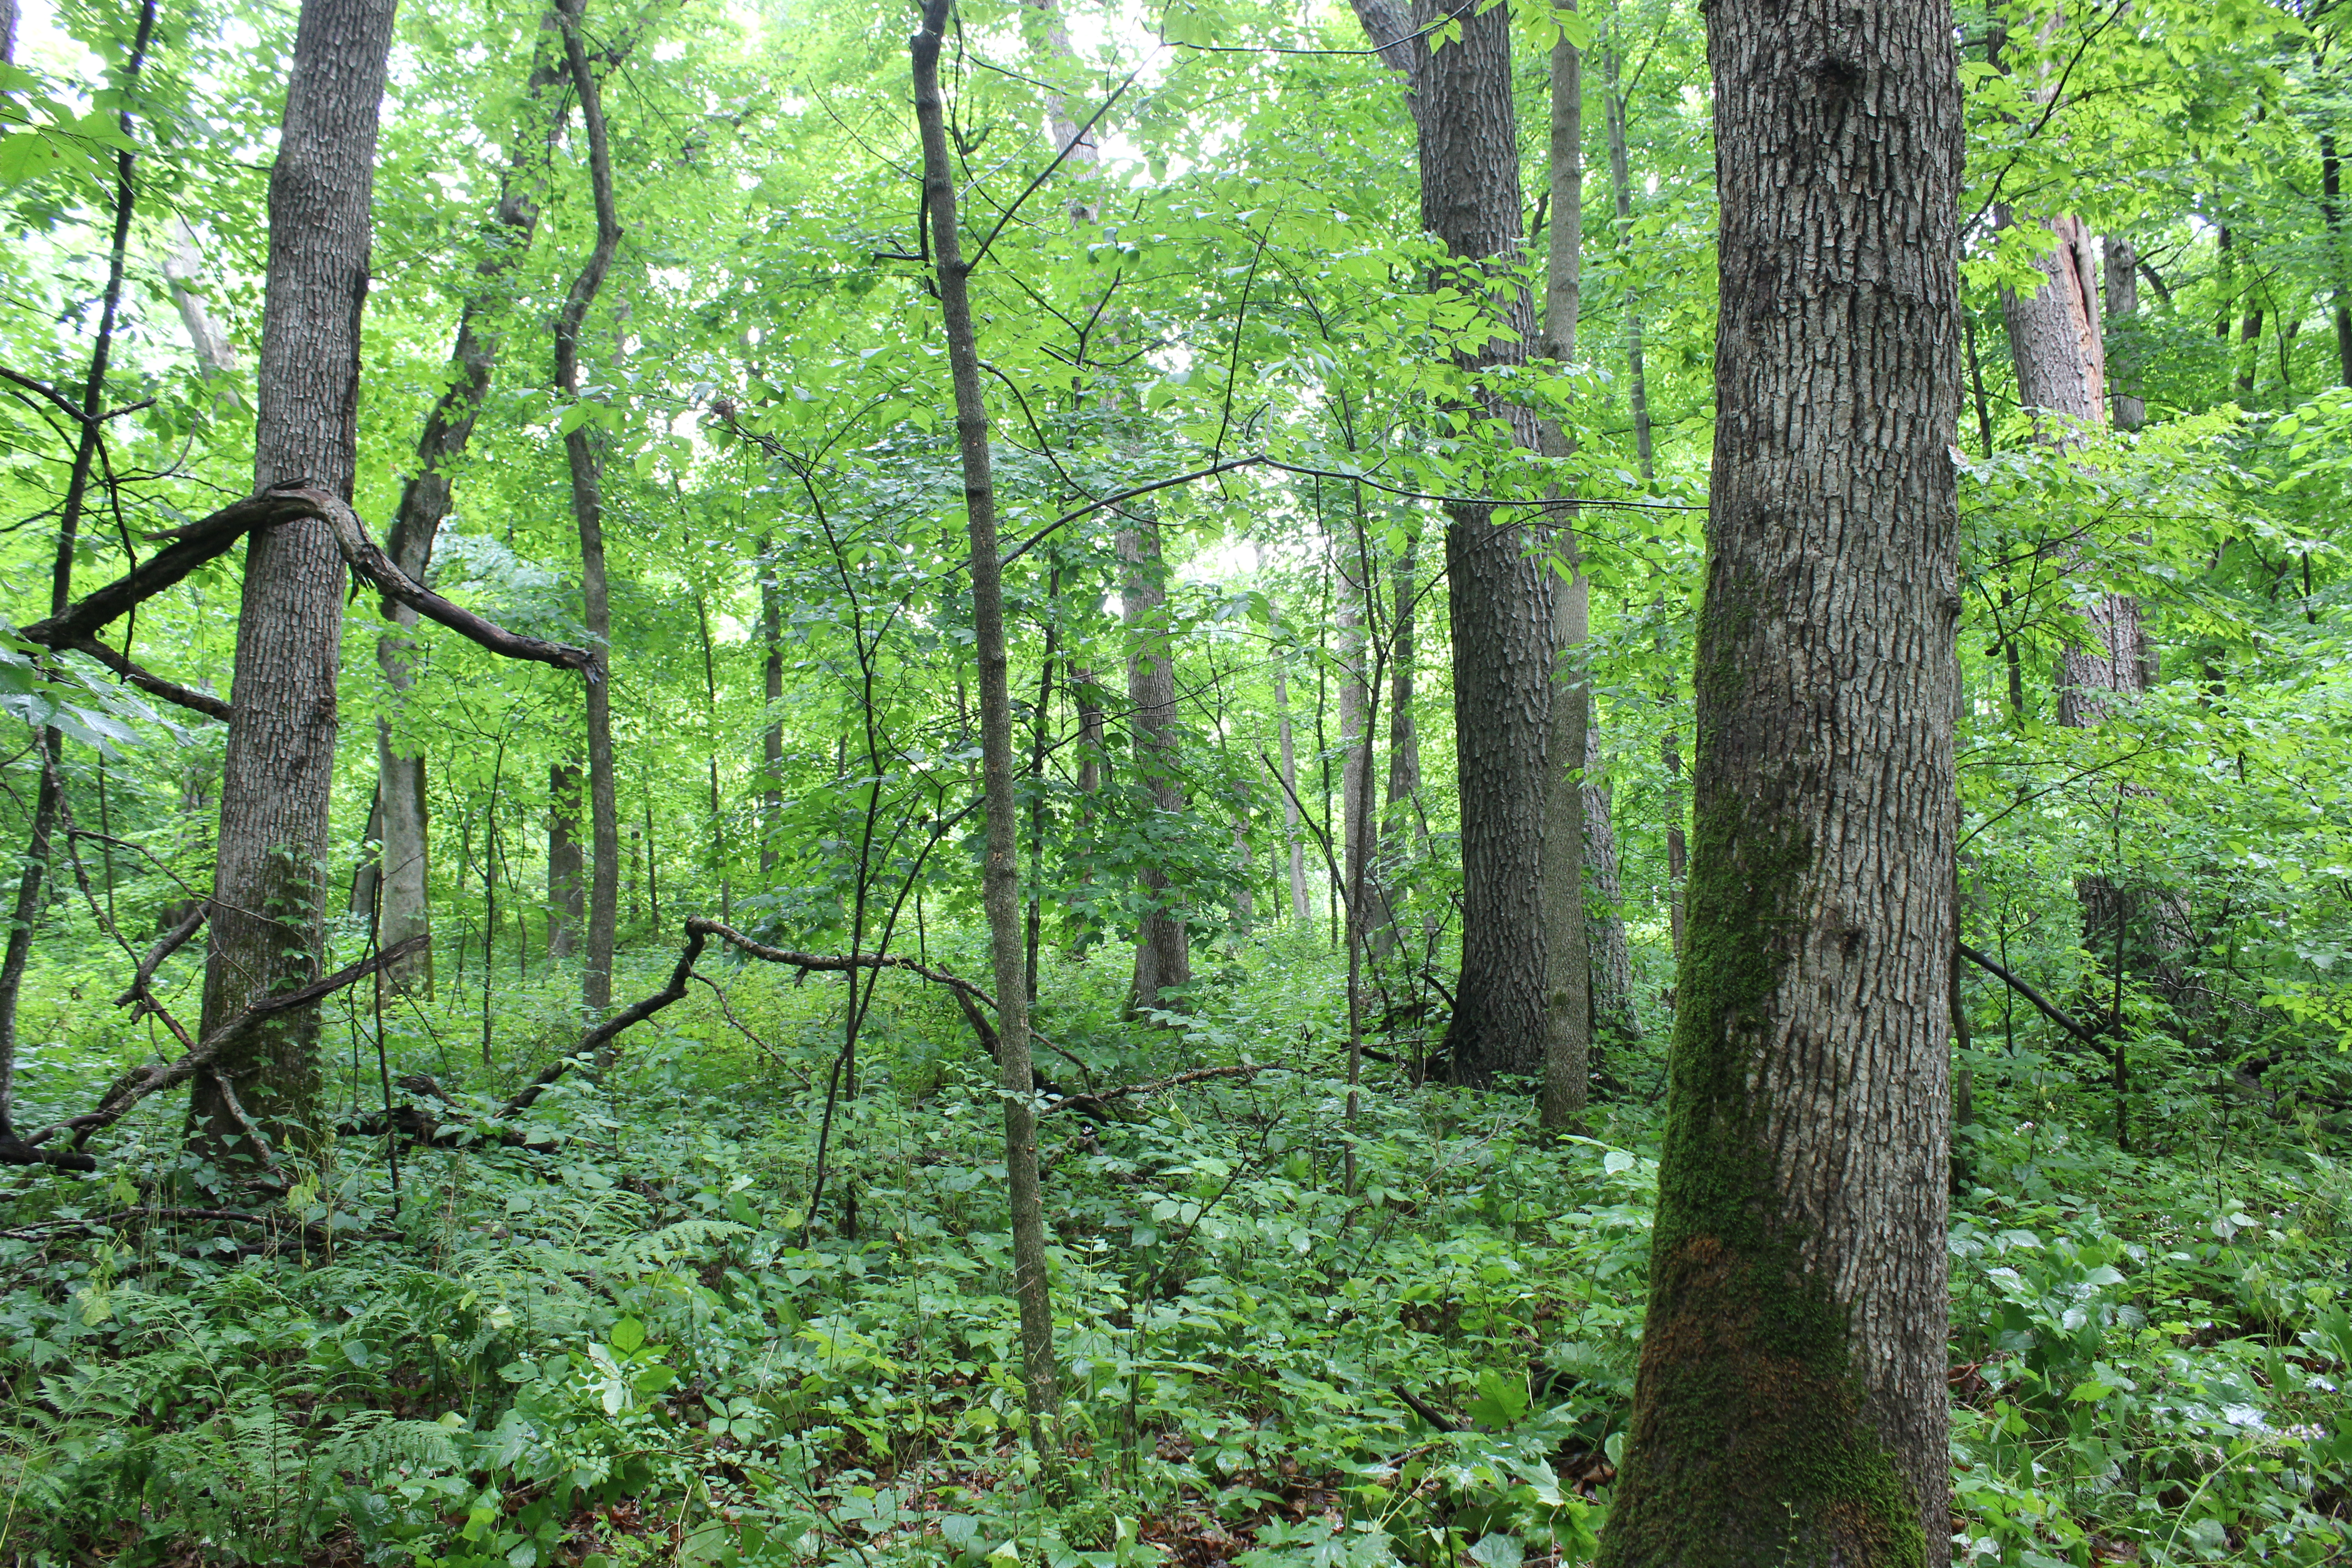 Dry mesic forest in the Driftless Area ASCC site